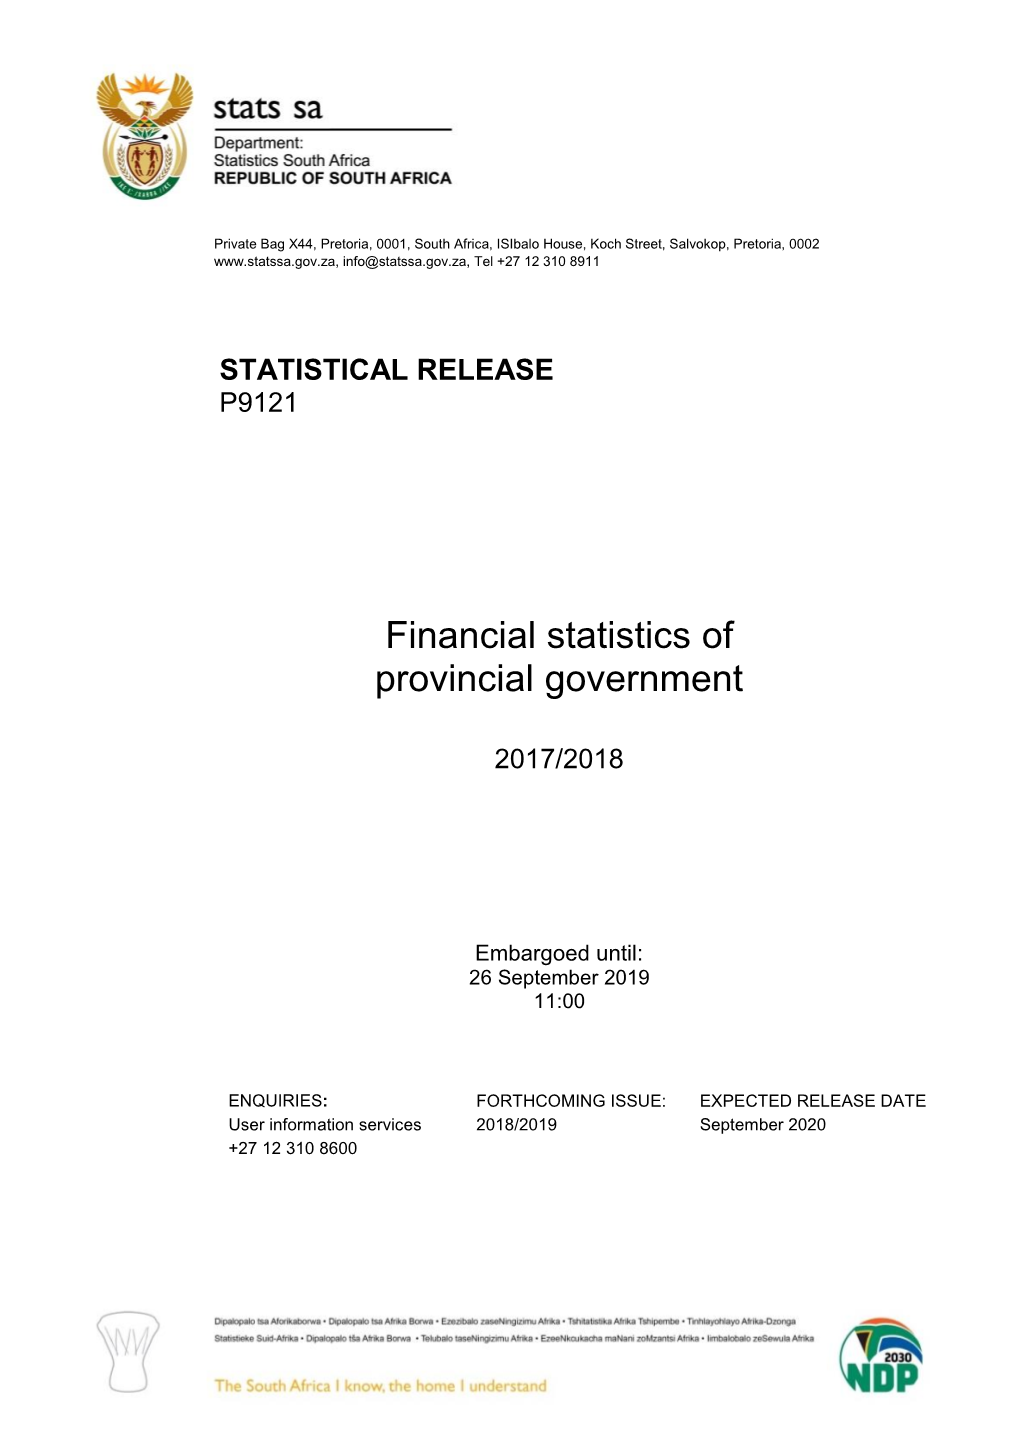 Financial Statistics of Provincial Government